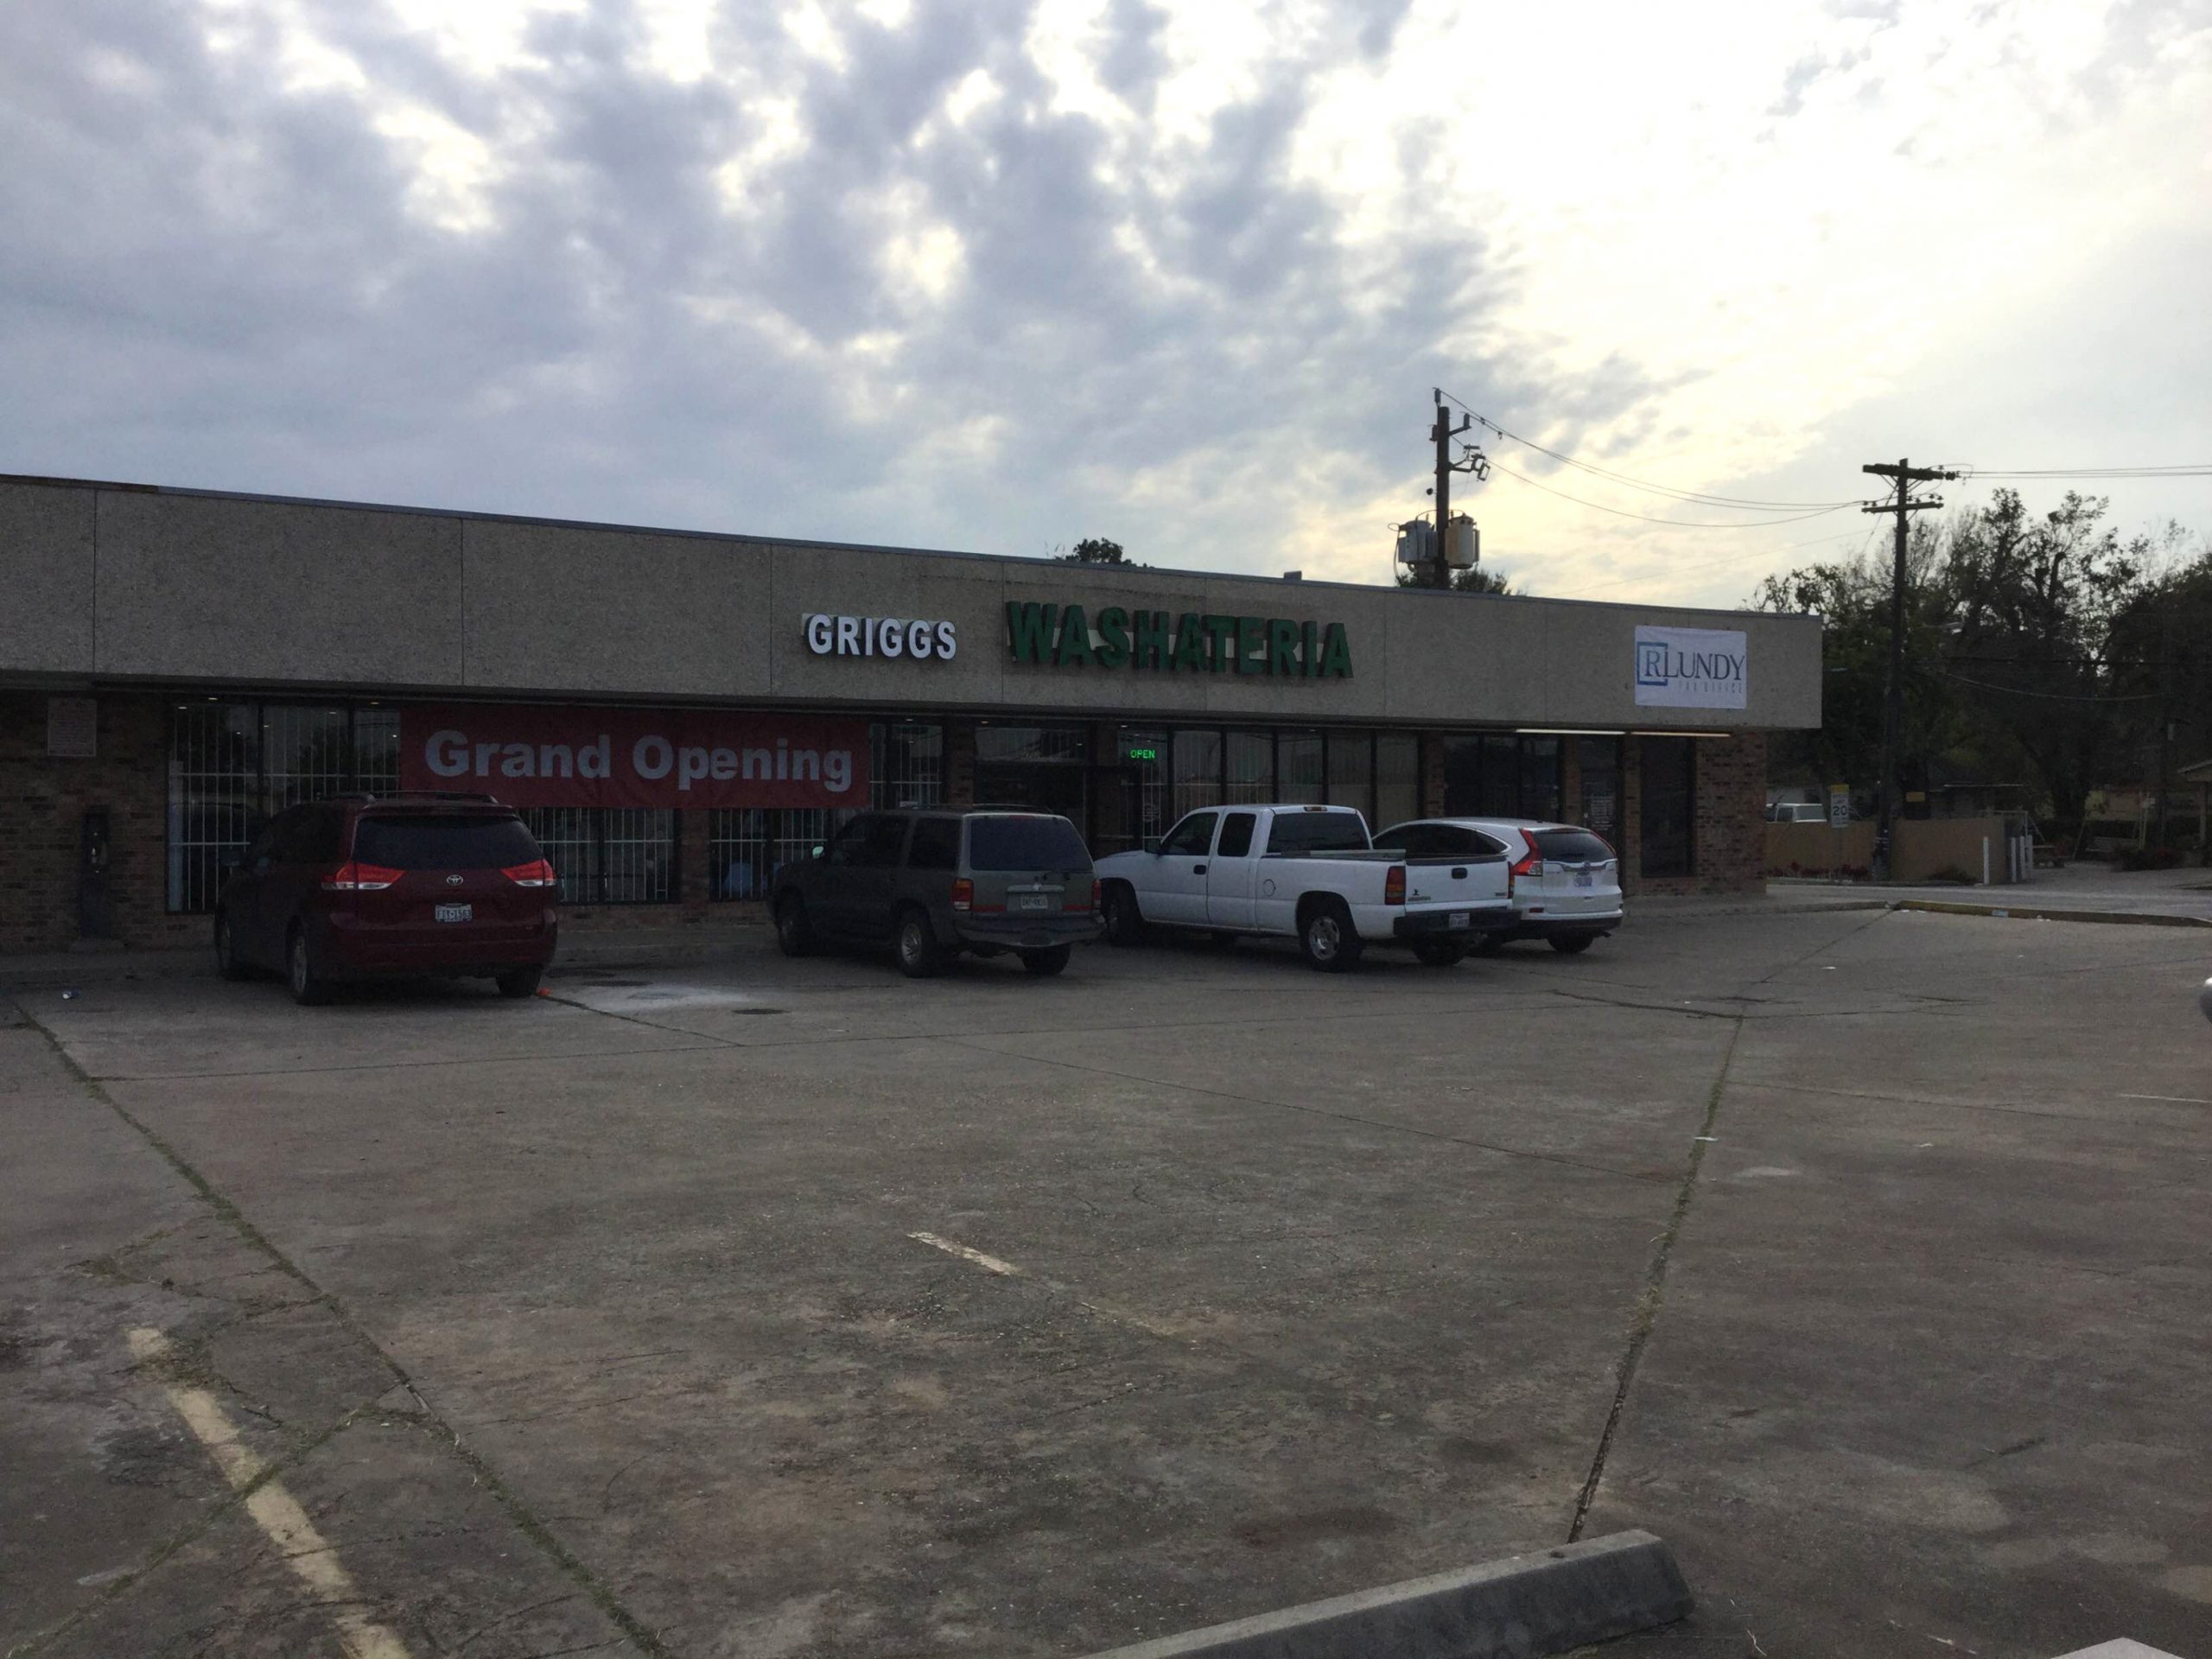 Car Insurance In Griggs Nd Dans Griggs Washateria 4702 Griggs Rd, Houston, Tx 77021 - Yp.com